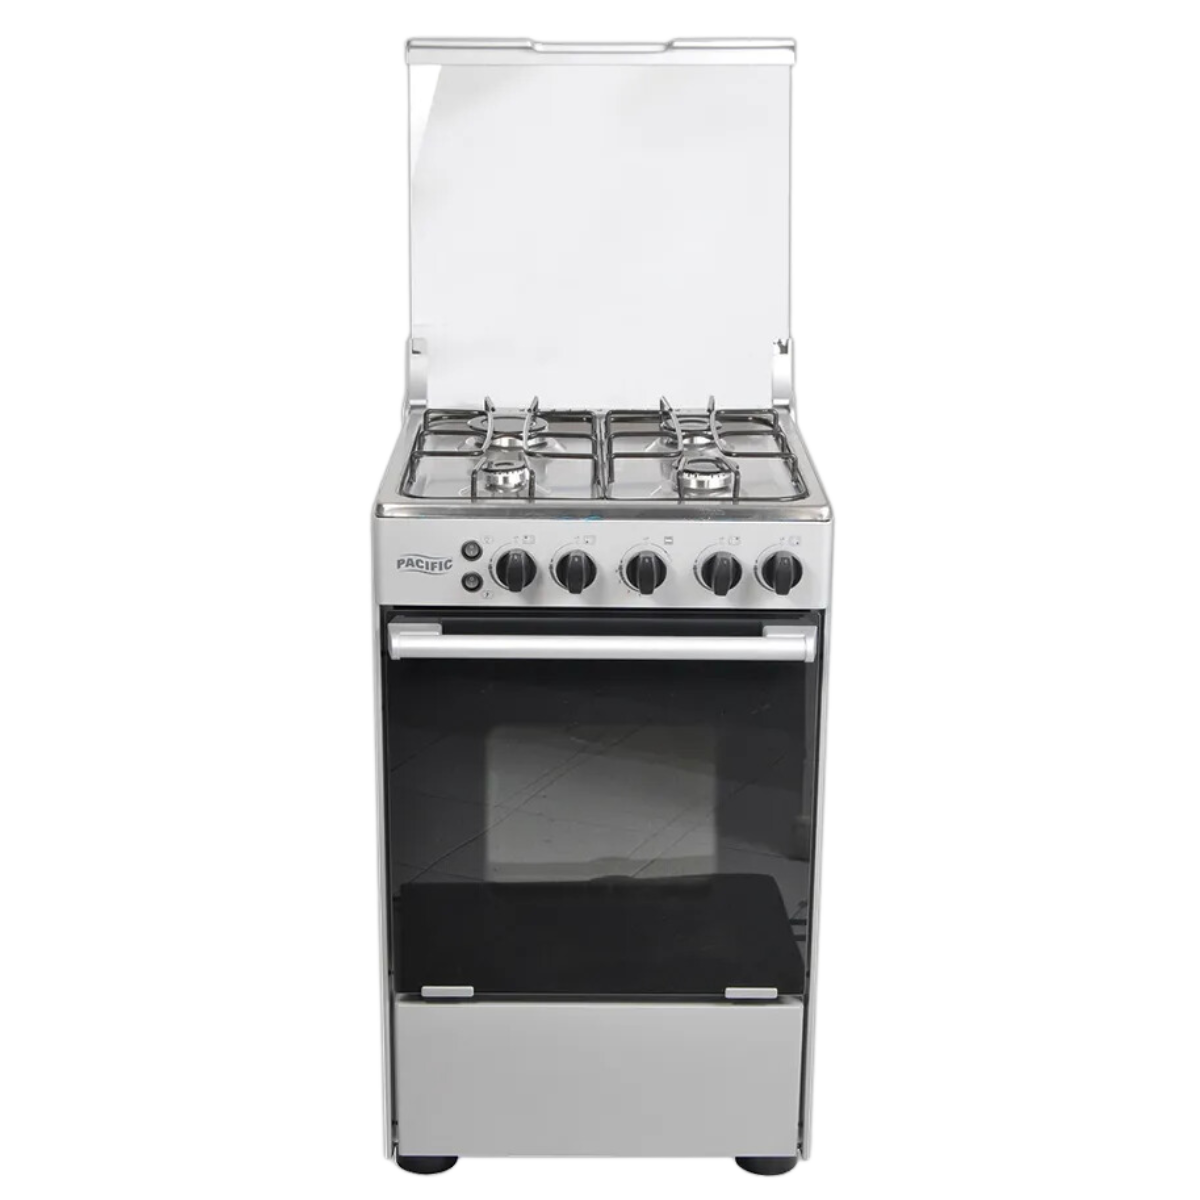 PACIFIC PG580 COOKER PACIFIC 4GAS 50X50